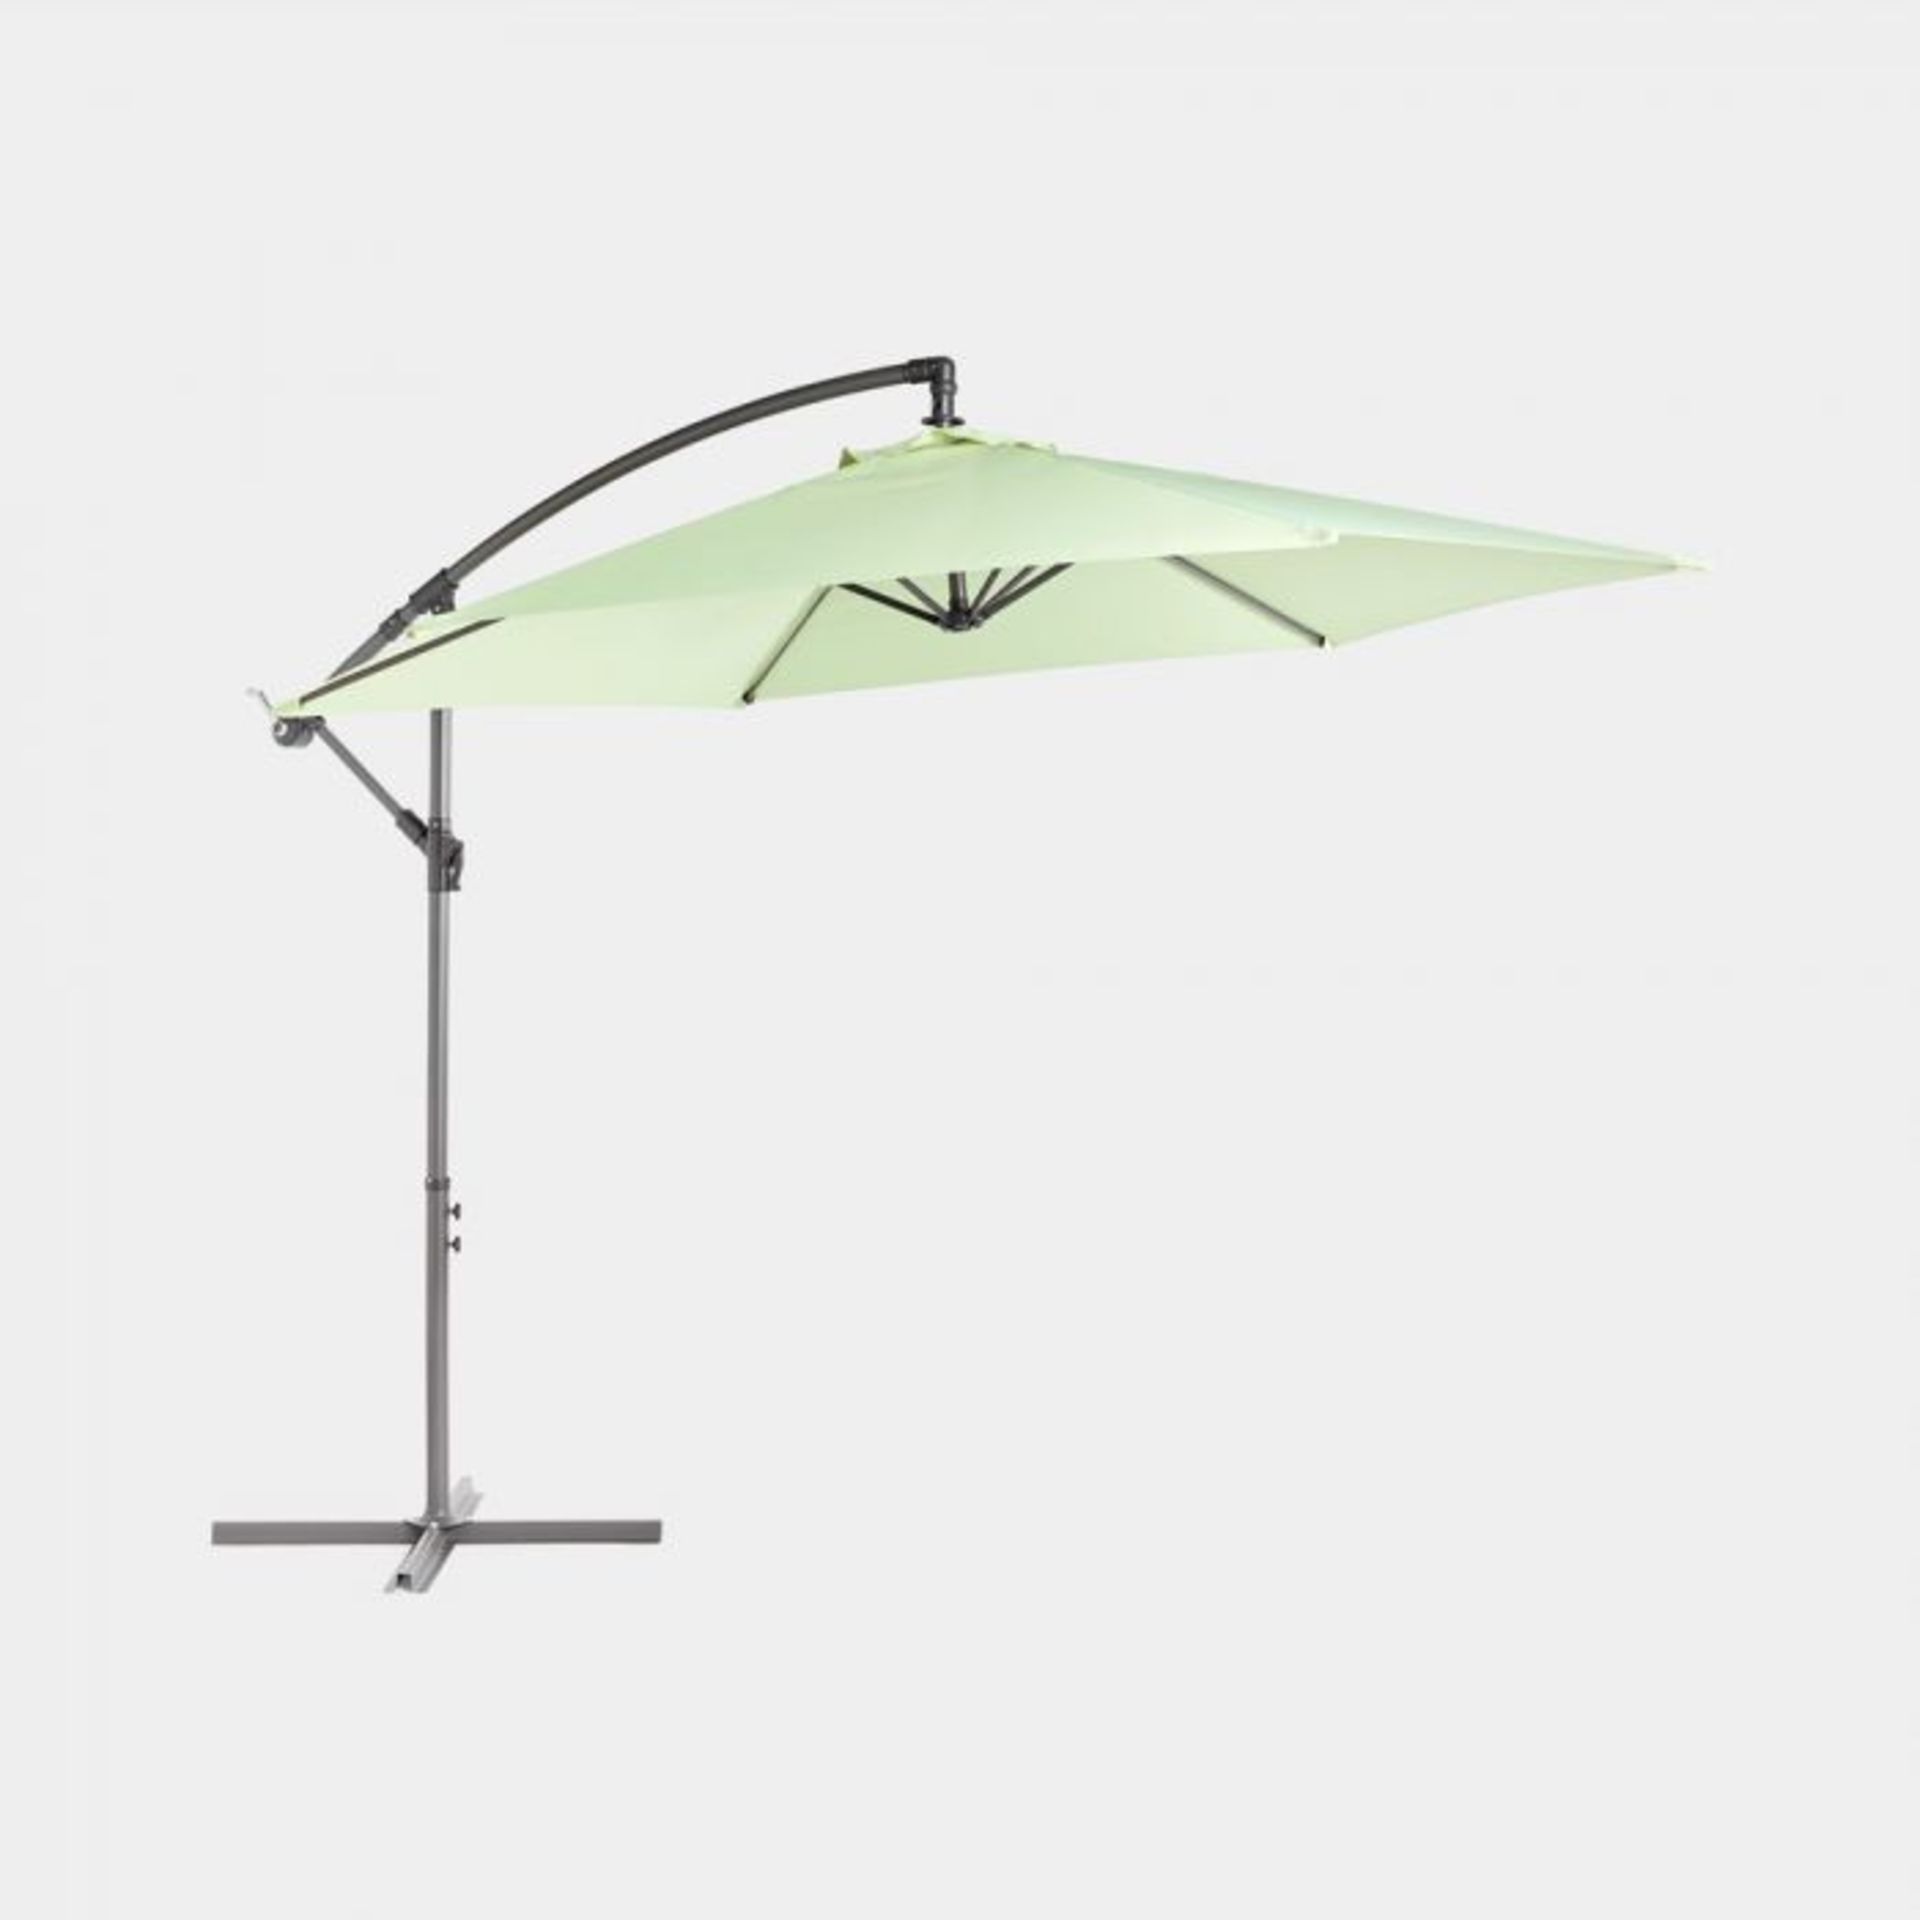 Sage Green 3m Cantilever Overhanging Banana Parasol. In a trending and stylish sage green colour,